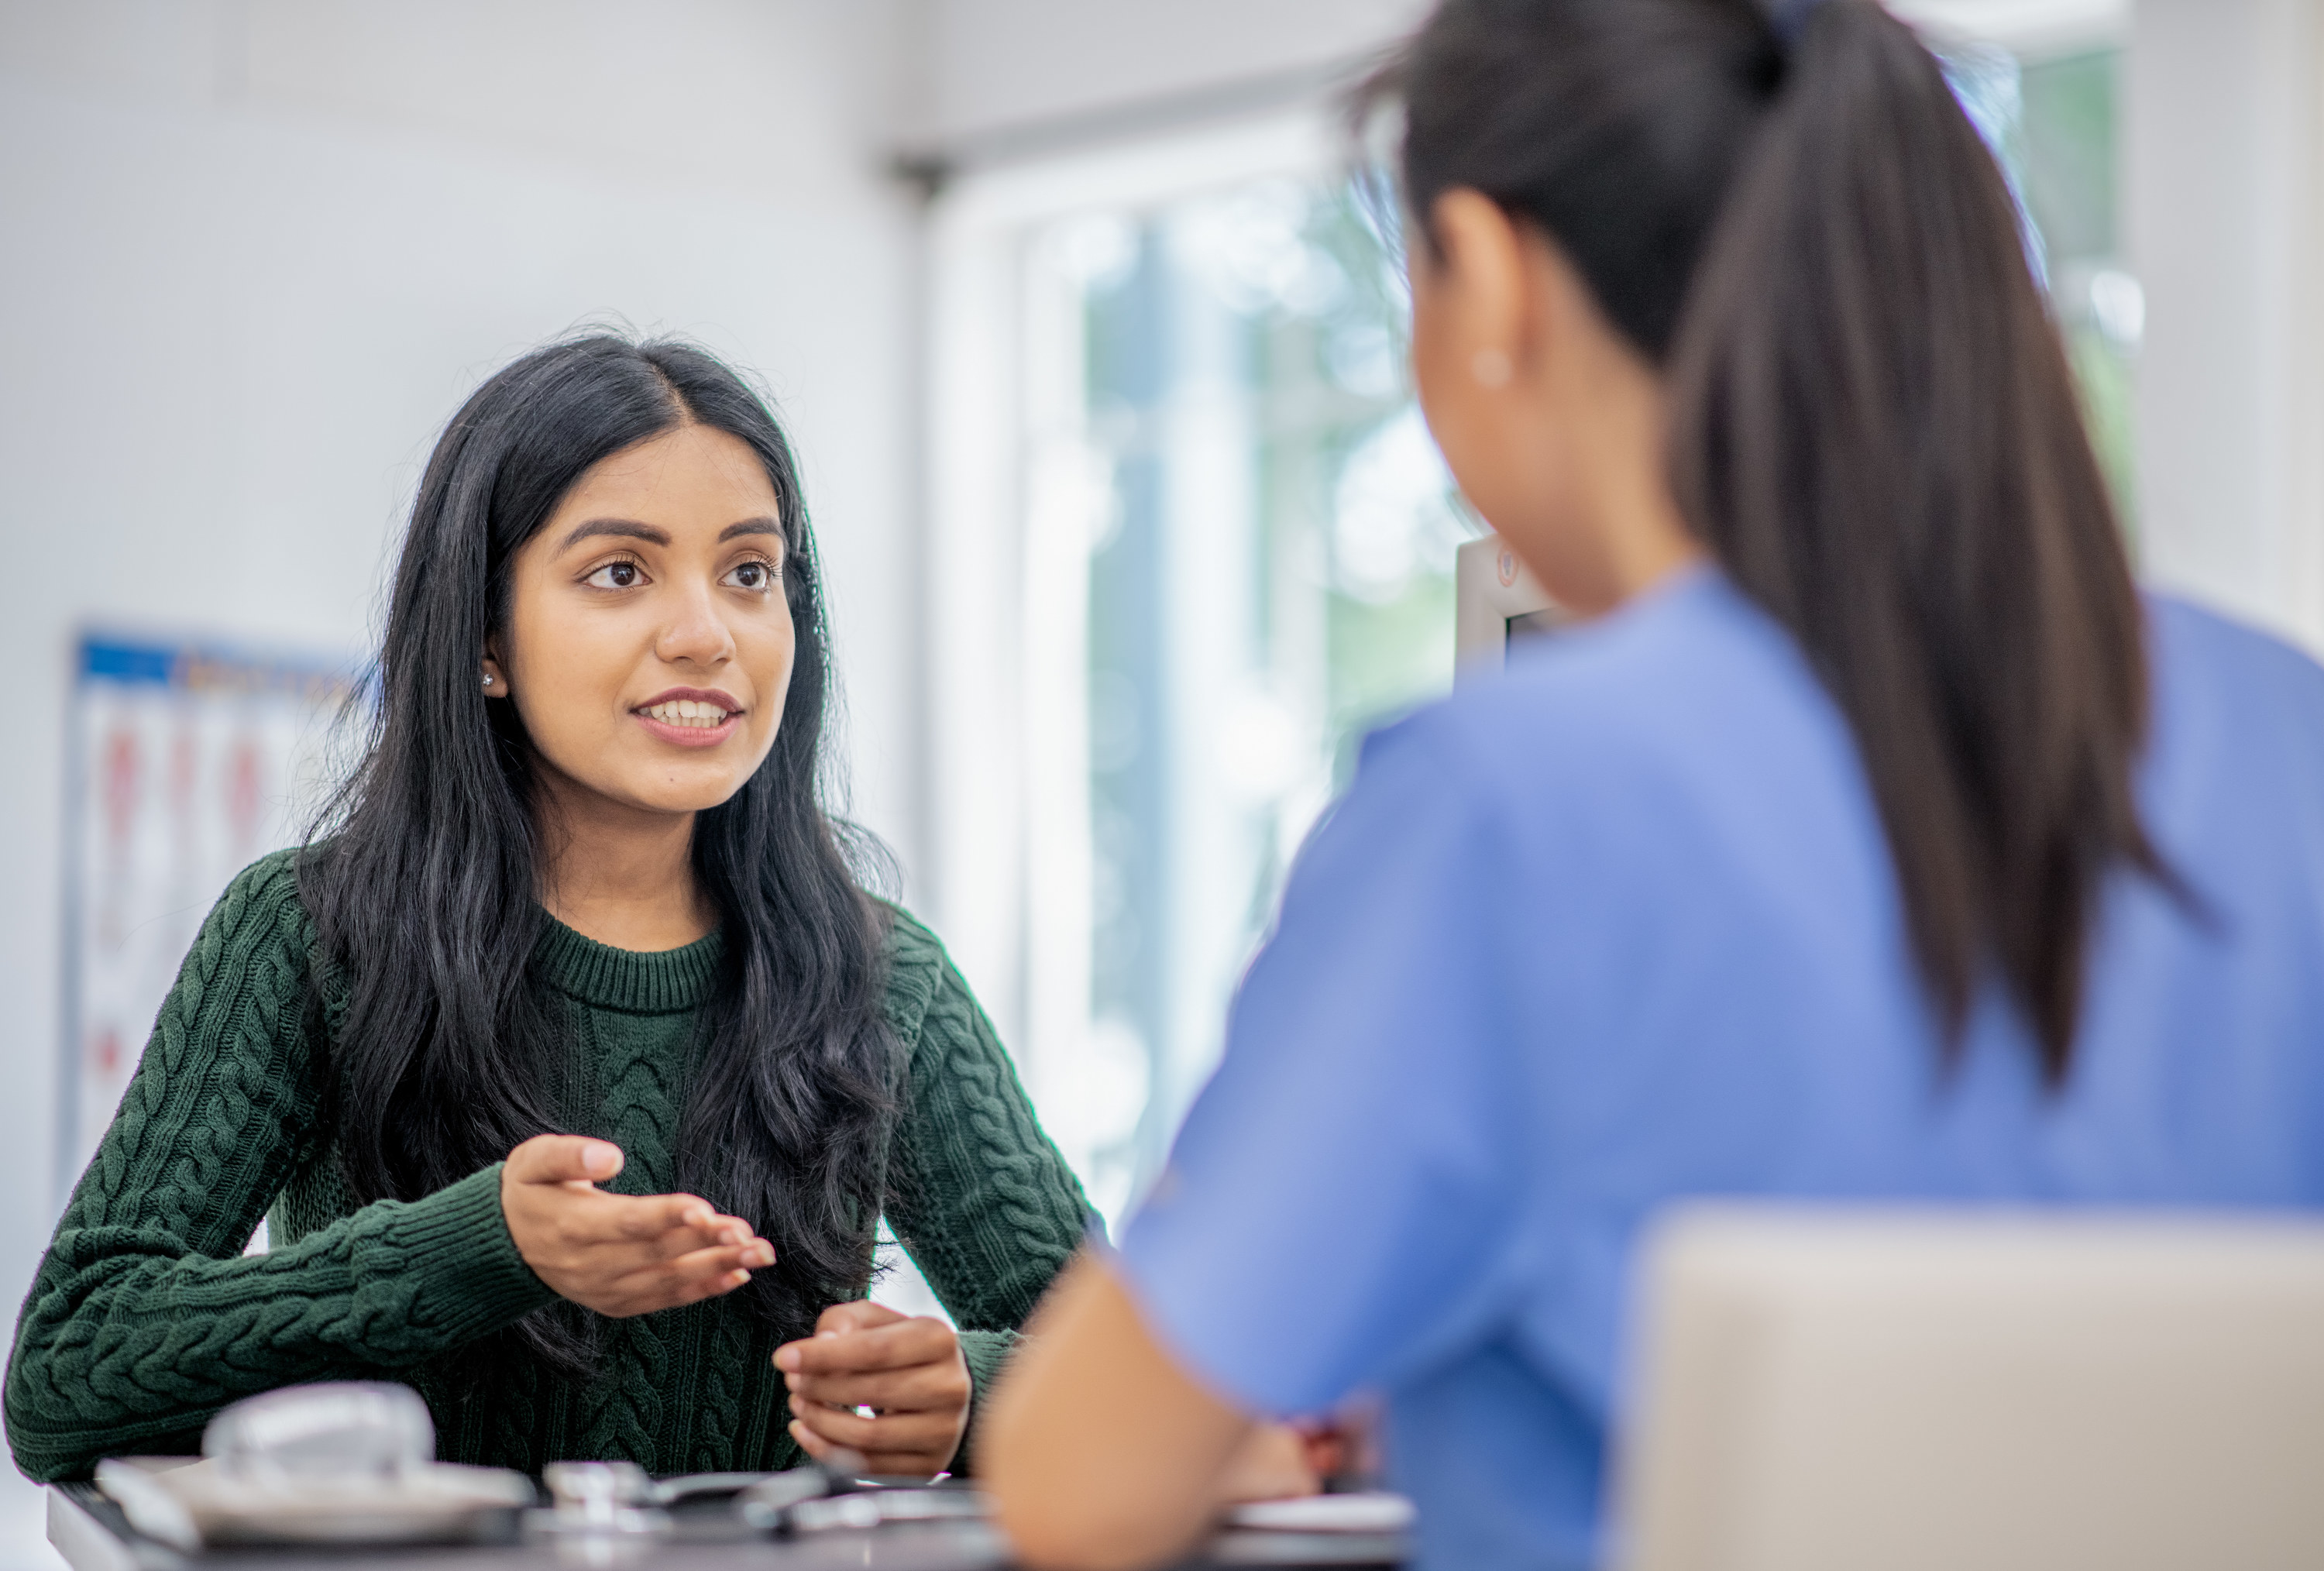 A young woman visits a specialist to consult, appearing optimistic in discussion